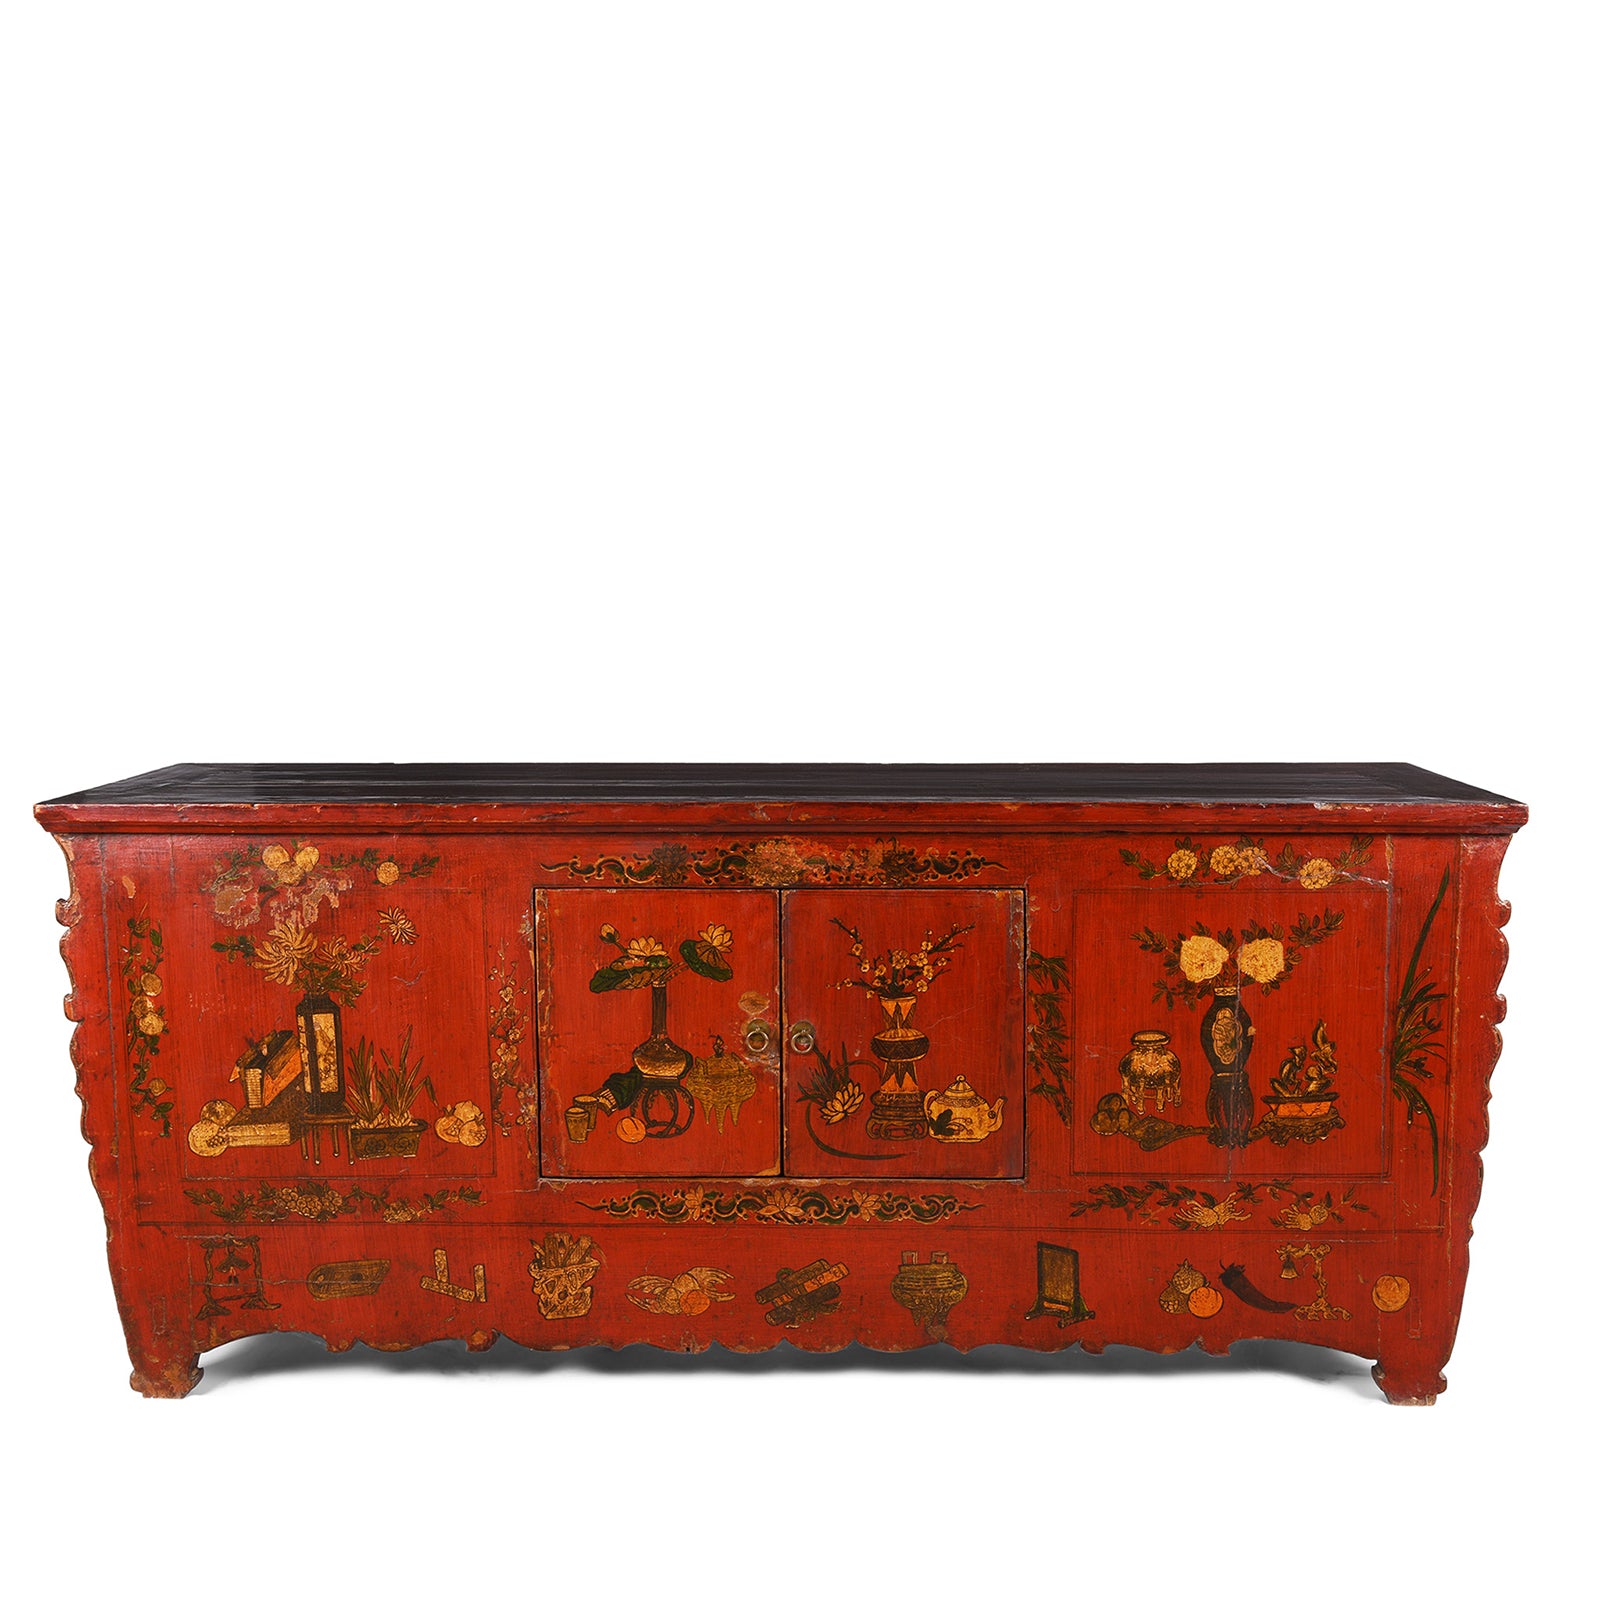 Antique Painted Sideboard From Qinghai- 19thC | Indigo Antiques